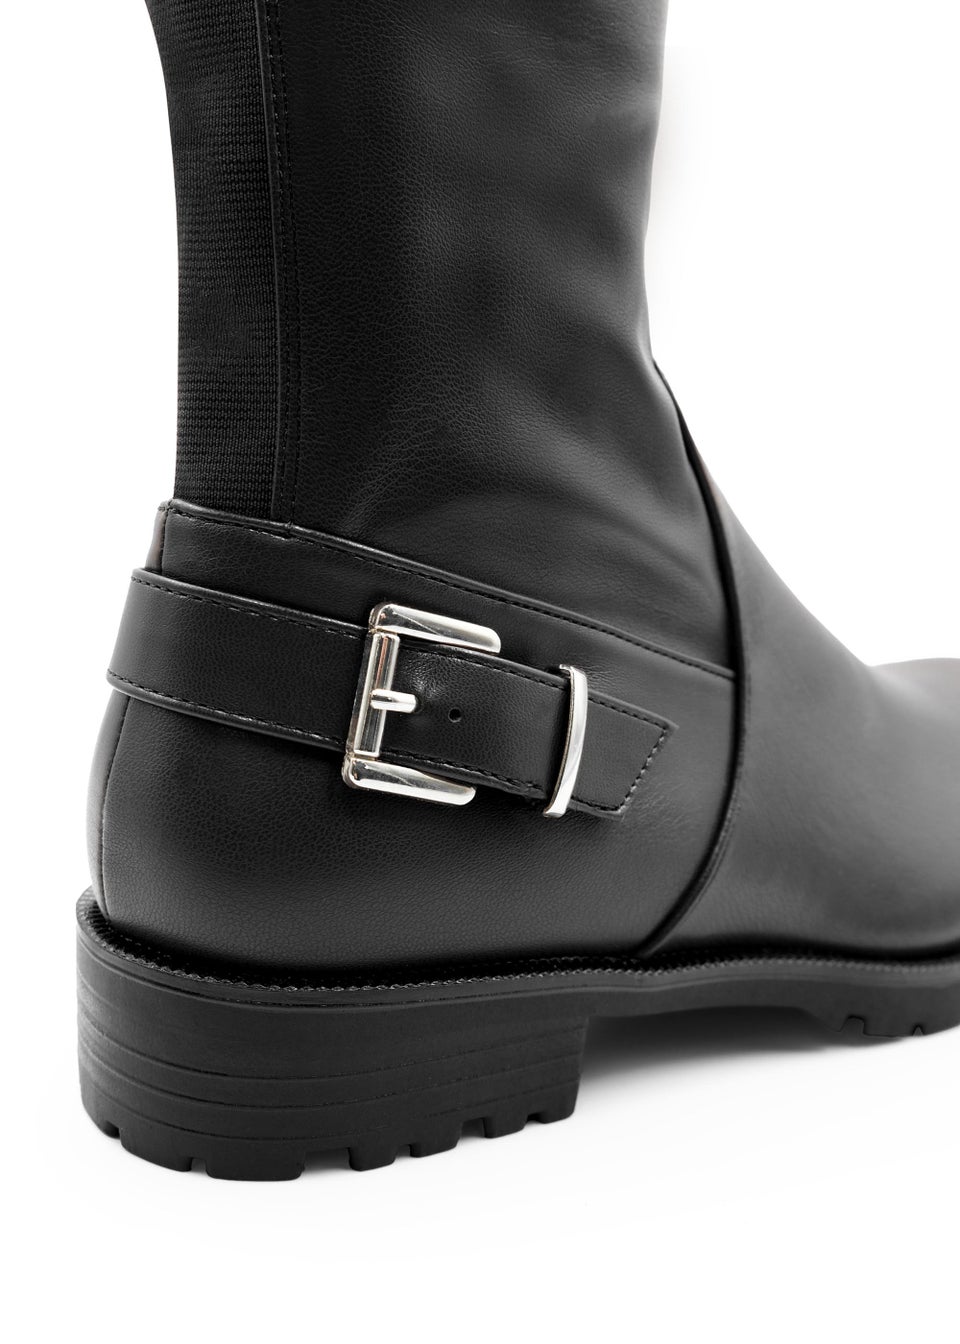 Where's That From Black Pu Roobie Calf High Stretch Boots